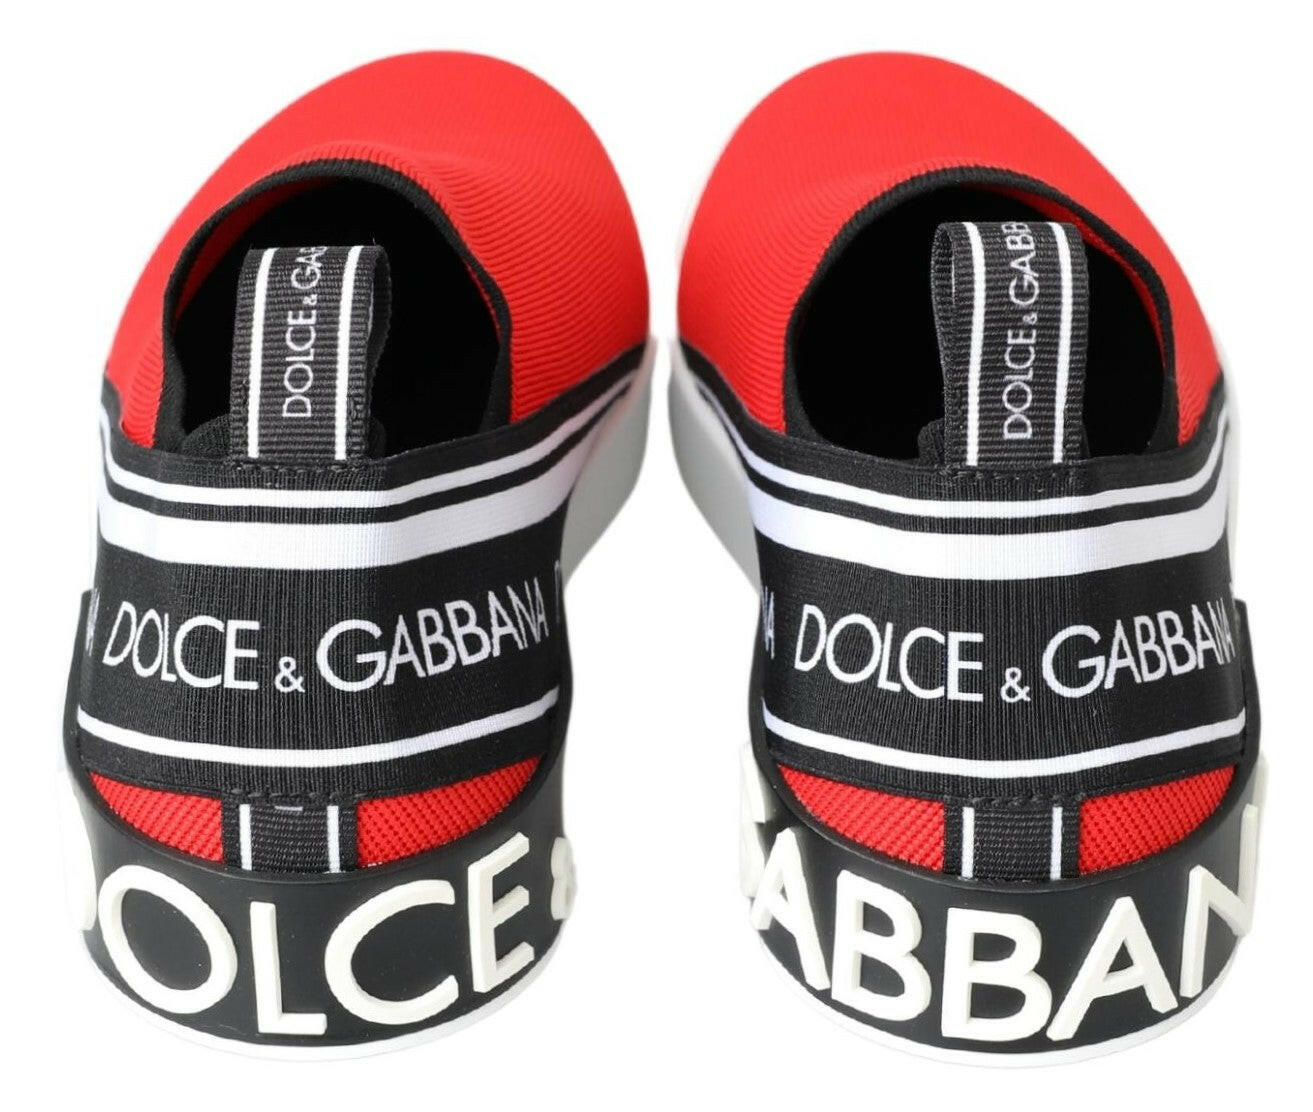 Dolce & Gabbana Red White Flat Sneakers Loafers Shoes - GENUINE AUTHENTIC BRAND LLC  